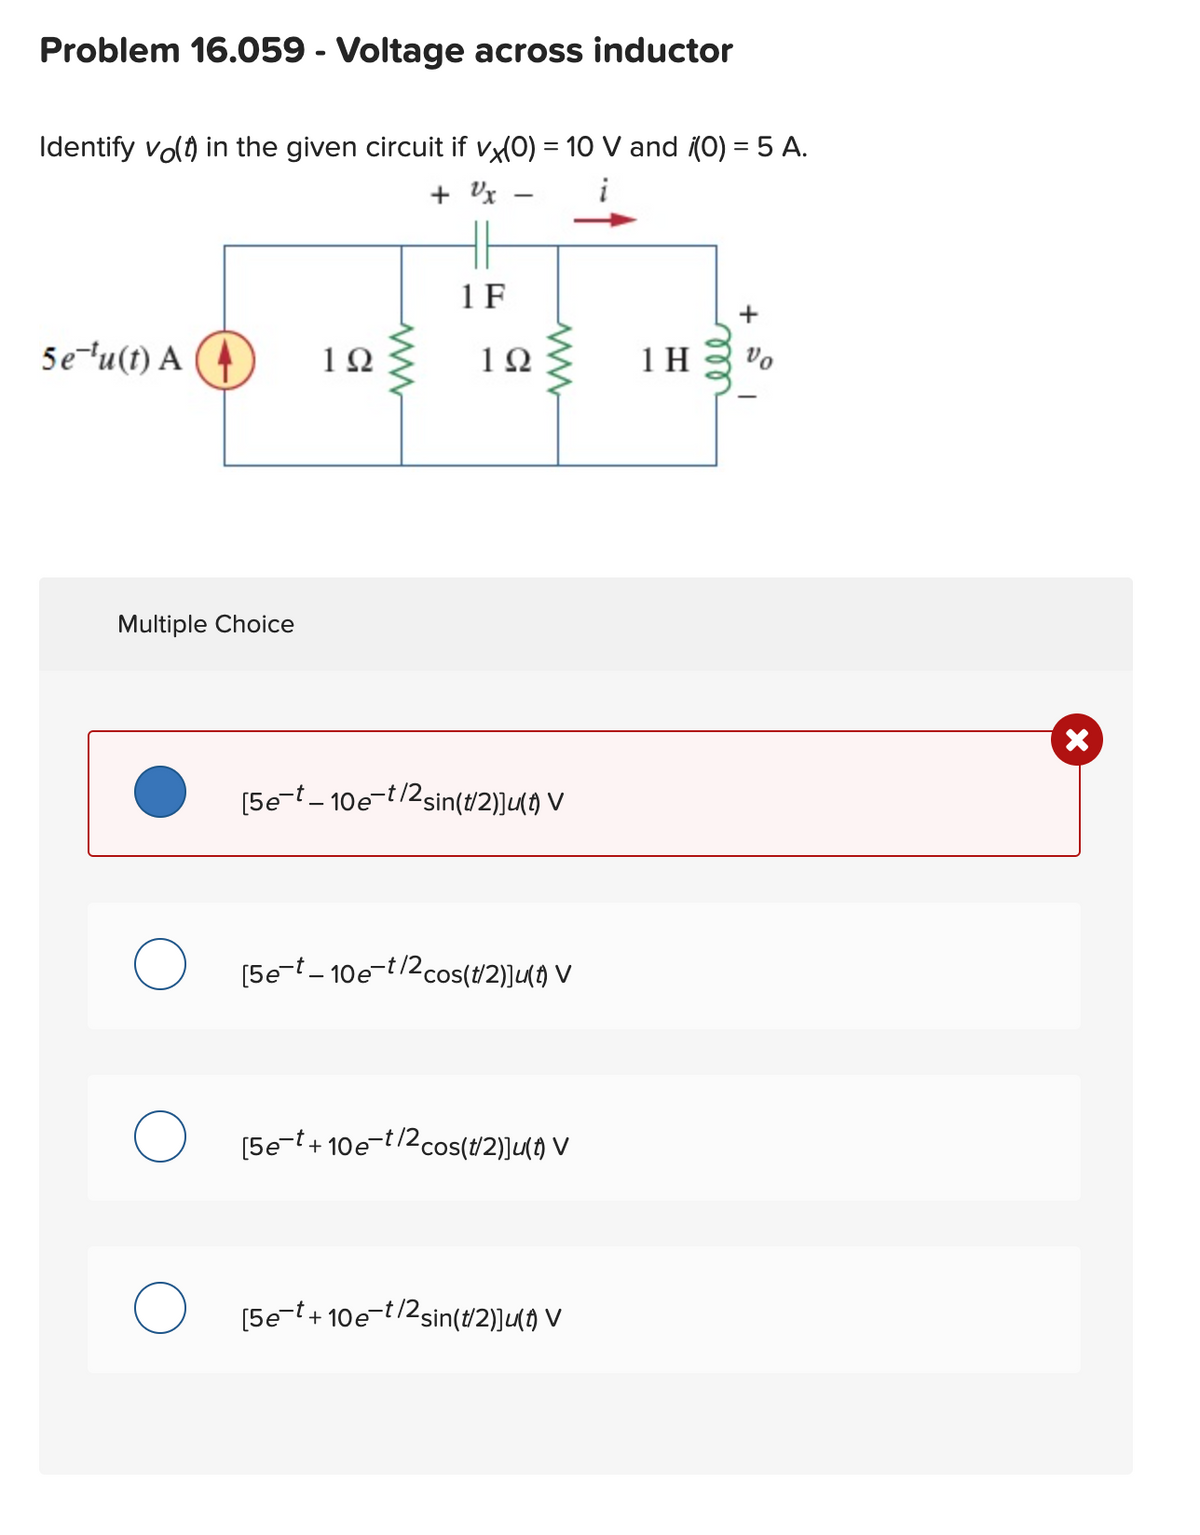 Problem 16.059 - Voltage across inductor
Identify vo(t) in the given circuit if vx(0) = 10 V and ¡(0) = 5 A.
+Vx-
i
5e-¹u(t) A
Multiple Choice
O
1Ω
ww
1 F
192
www
[5e-t-10e-t/2sin(1/2)]u(t) V
[5e-t-10e-t/2cos(1/2)]u(1) V
[5e-t+10e-t/2cos(t/2))u(t) V
[5e-t+10e-t/2sin(t/2)]u(†) V
1H
мее
+
Vo
X